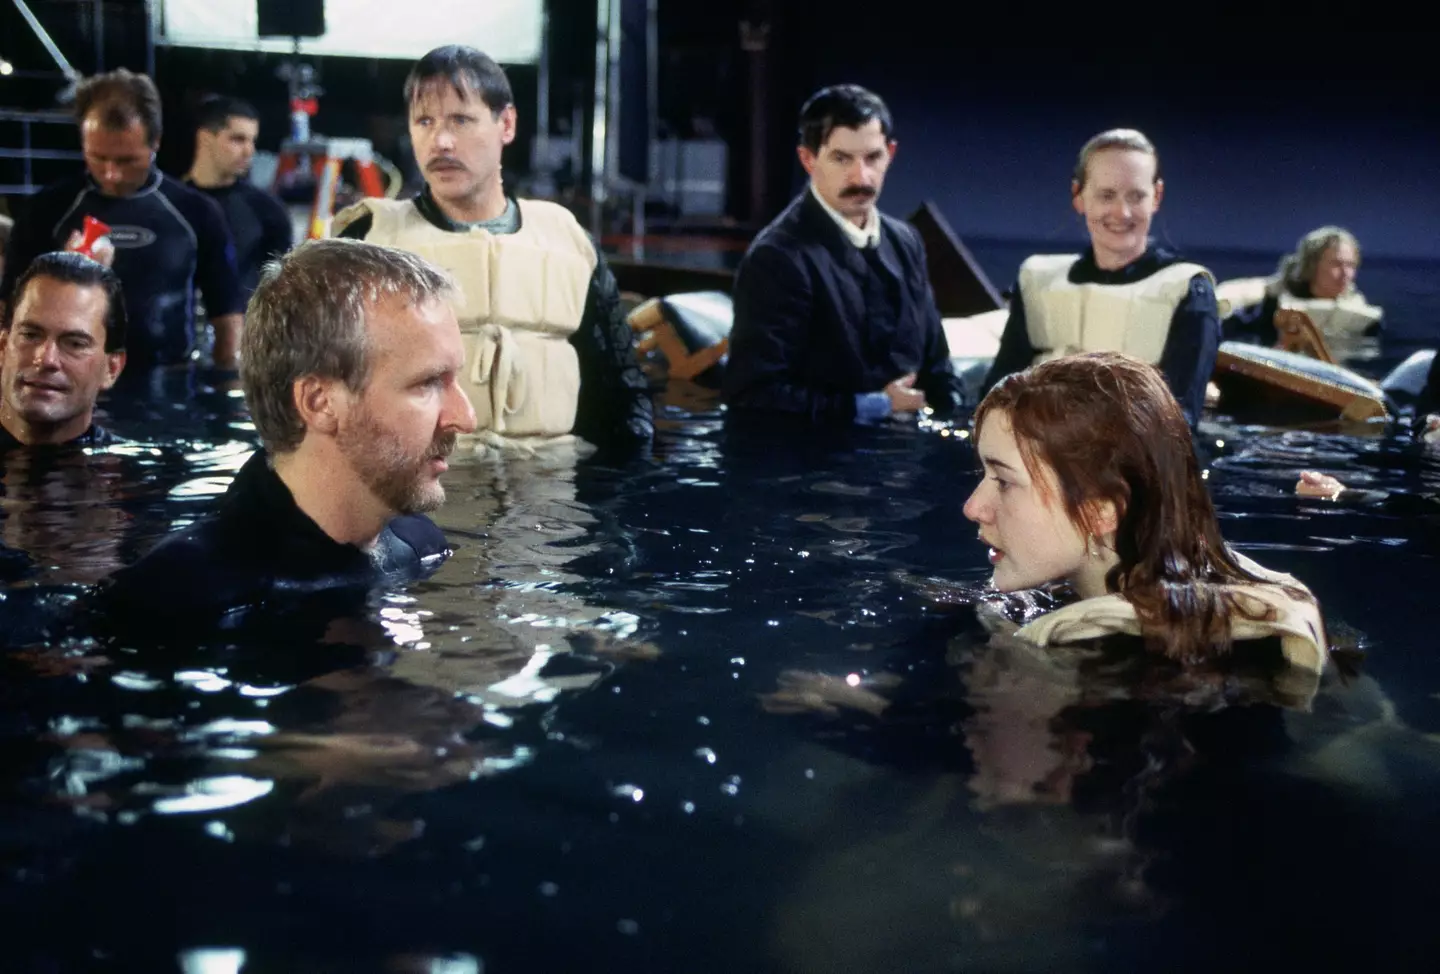 Later this month, we’ll see James Cameron and Kate Winslet collaborate for the first time since 1997 when they worked on Titanic together.